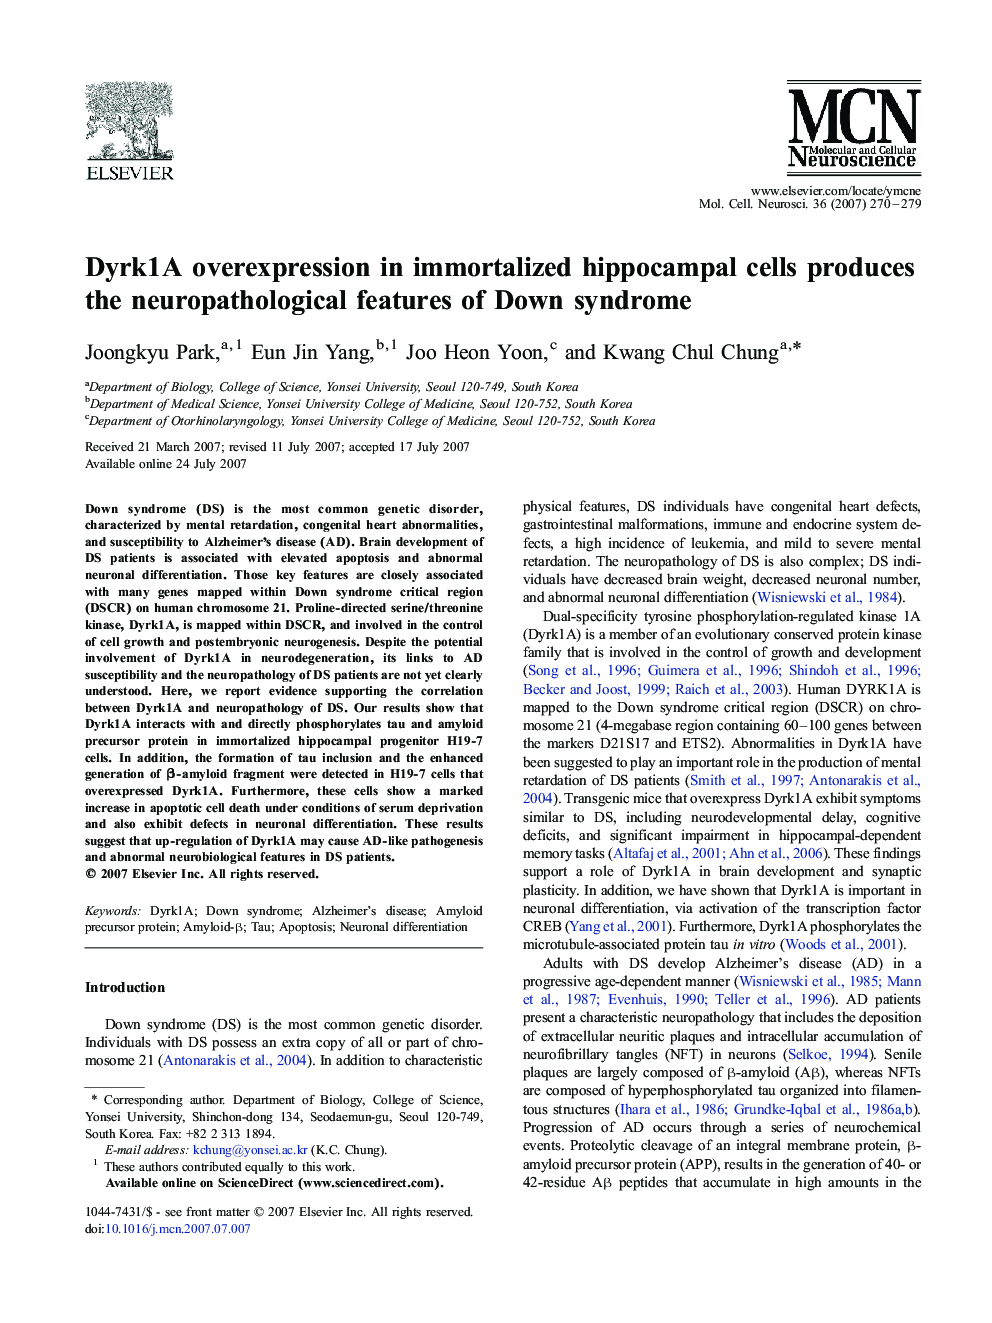 Dyrk1A overexpression in immortalized hippocampal cells produces the neuropathological features of Down syndrome